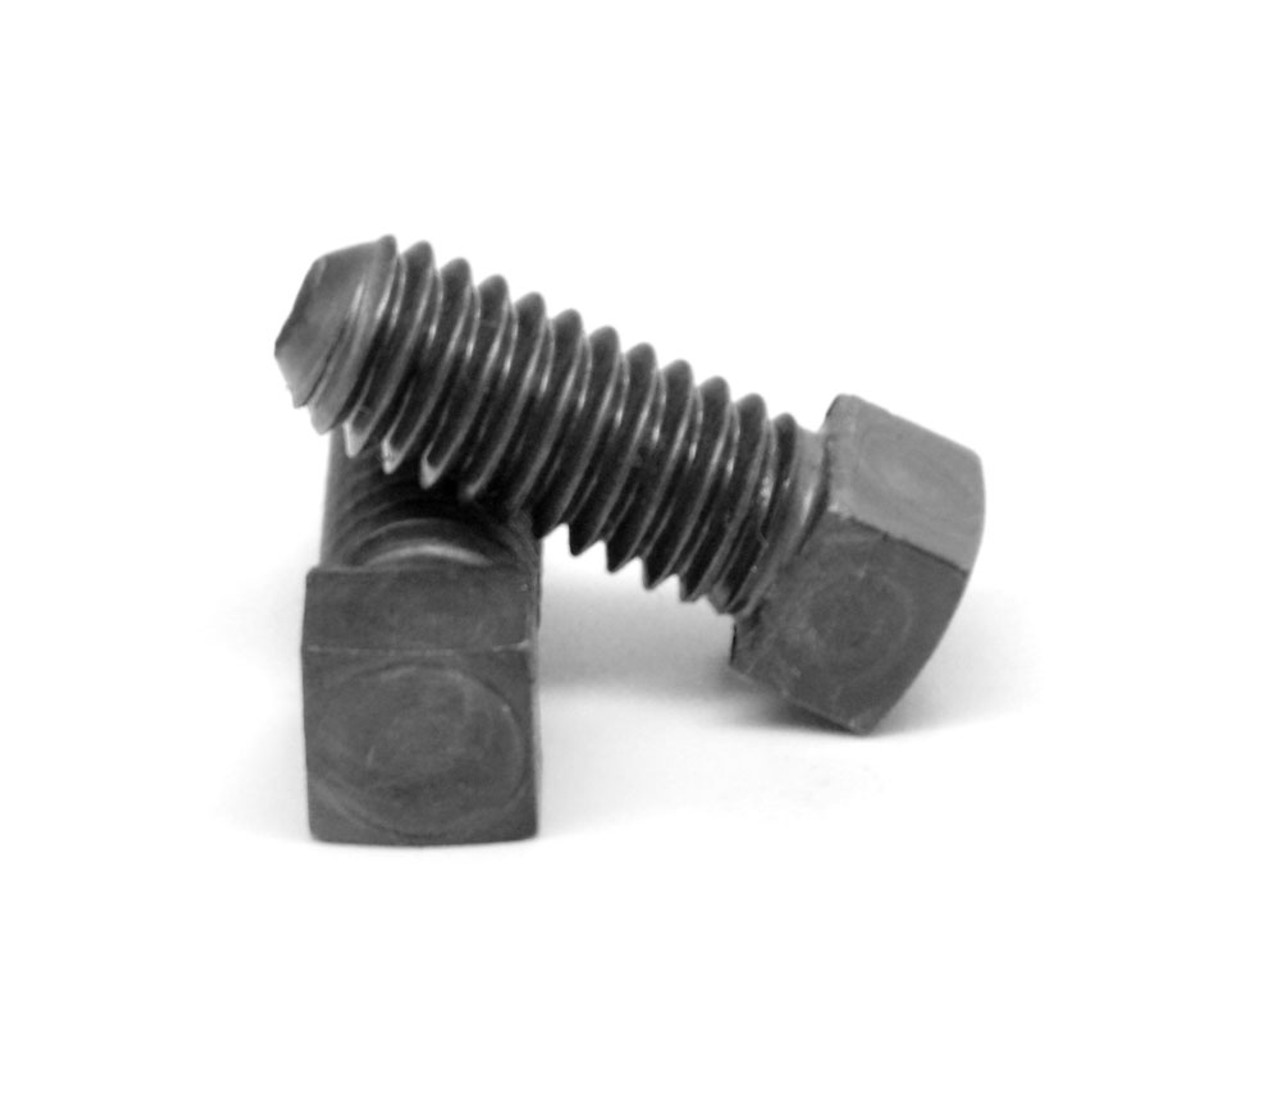 5/8"-11 x 1 3/4" (FT) Coarse Thread Square Head Set Screw Oval Point Low Carbon Steel Case Hardened Plain Finish